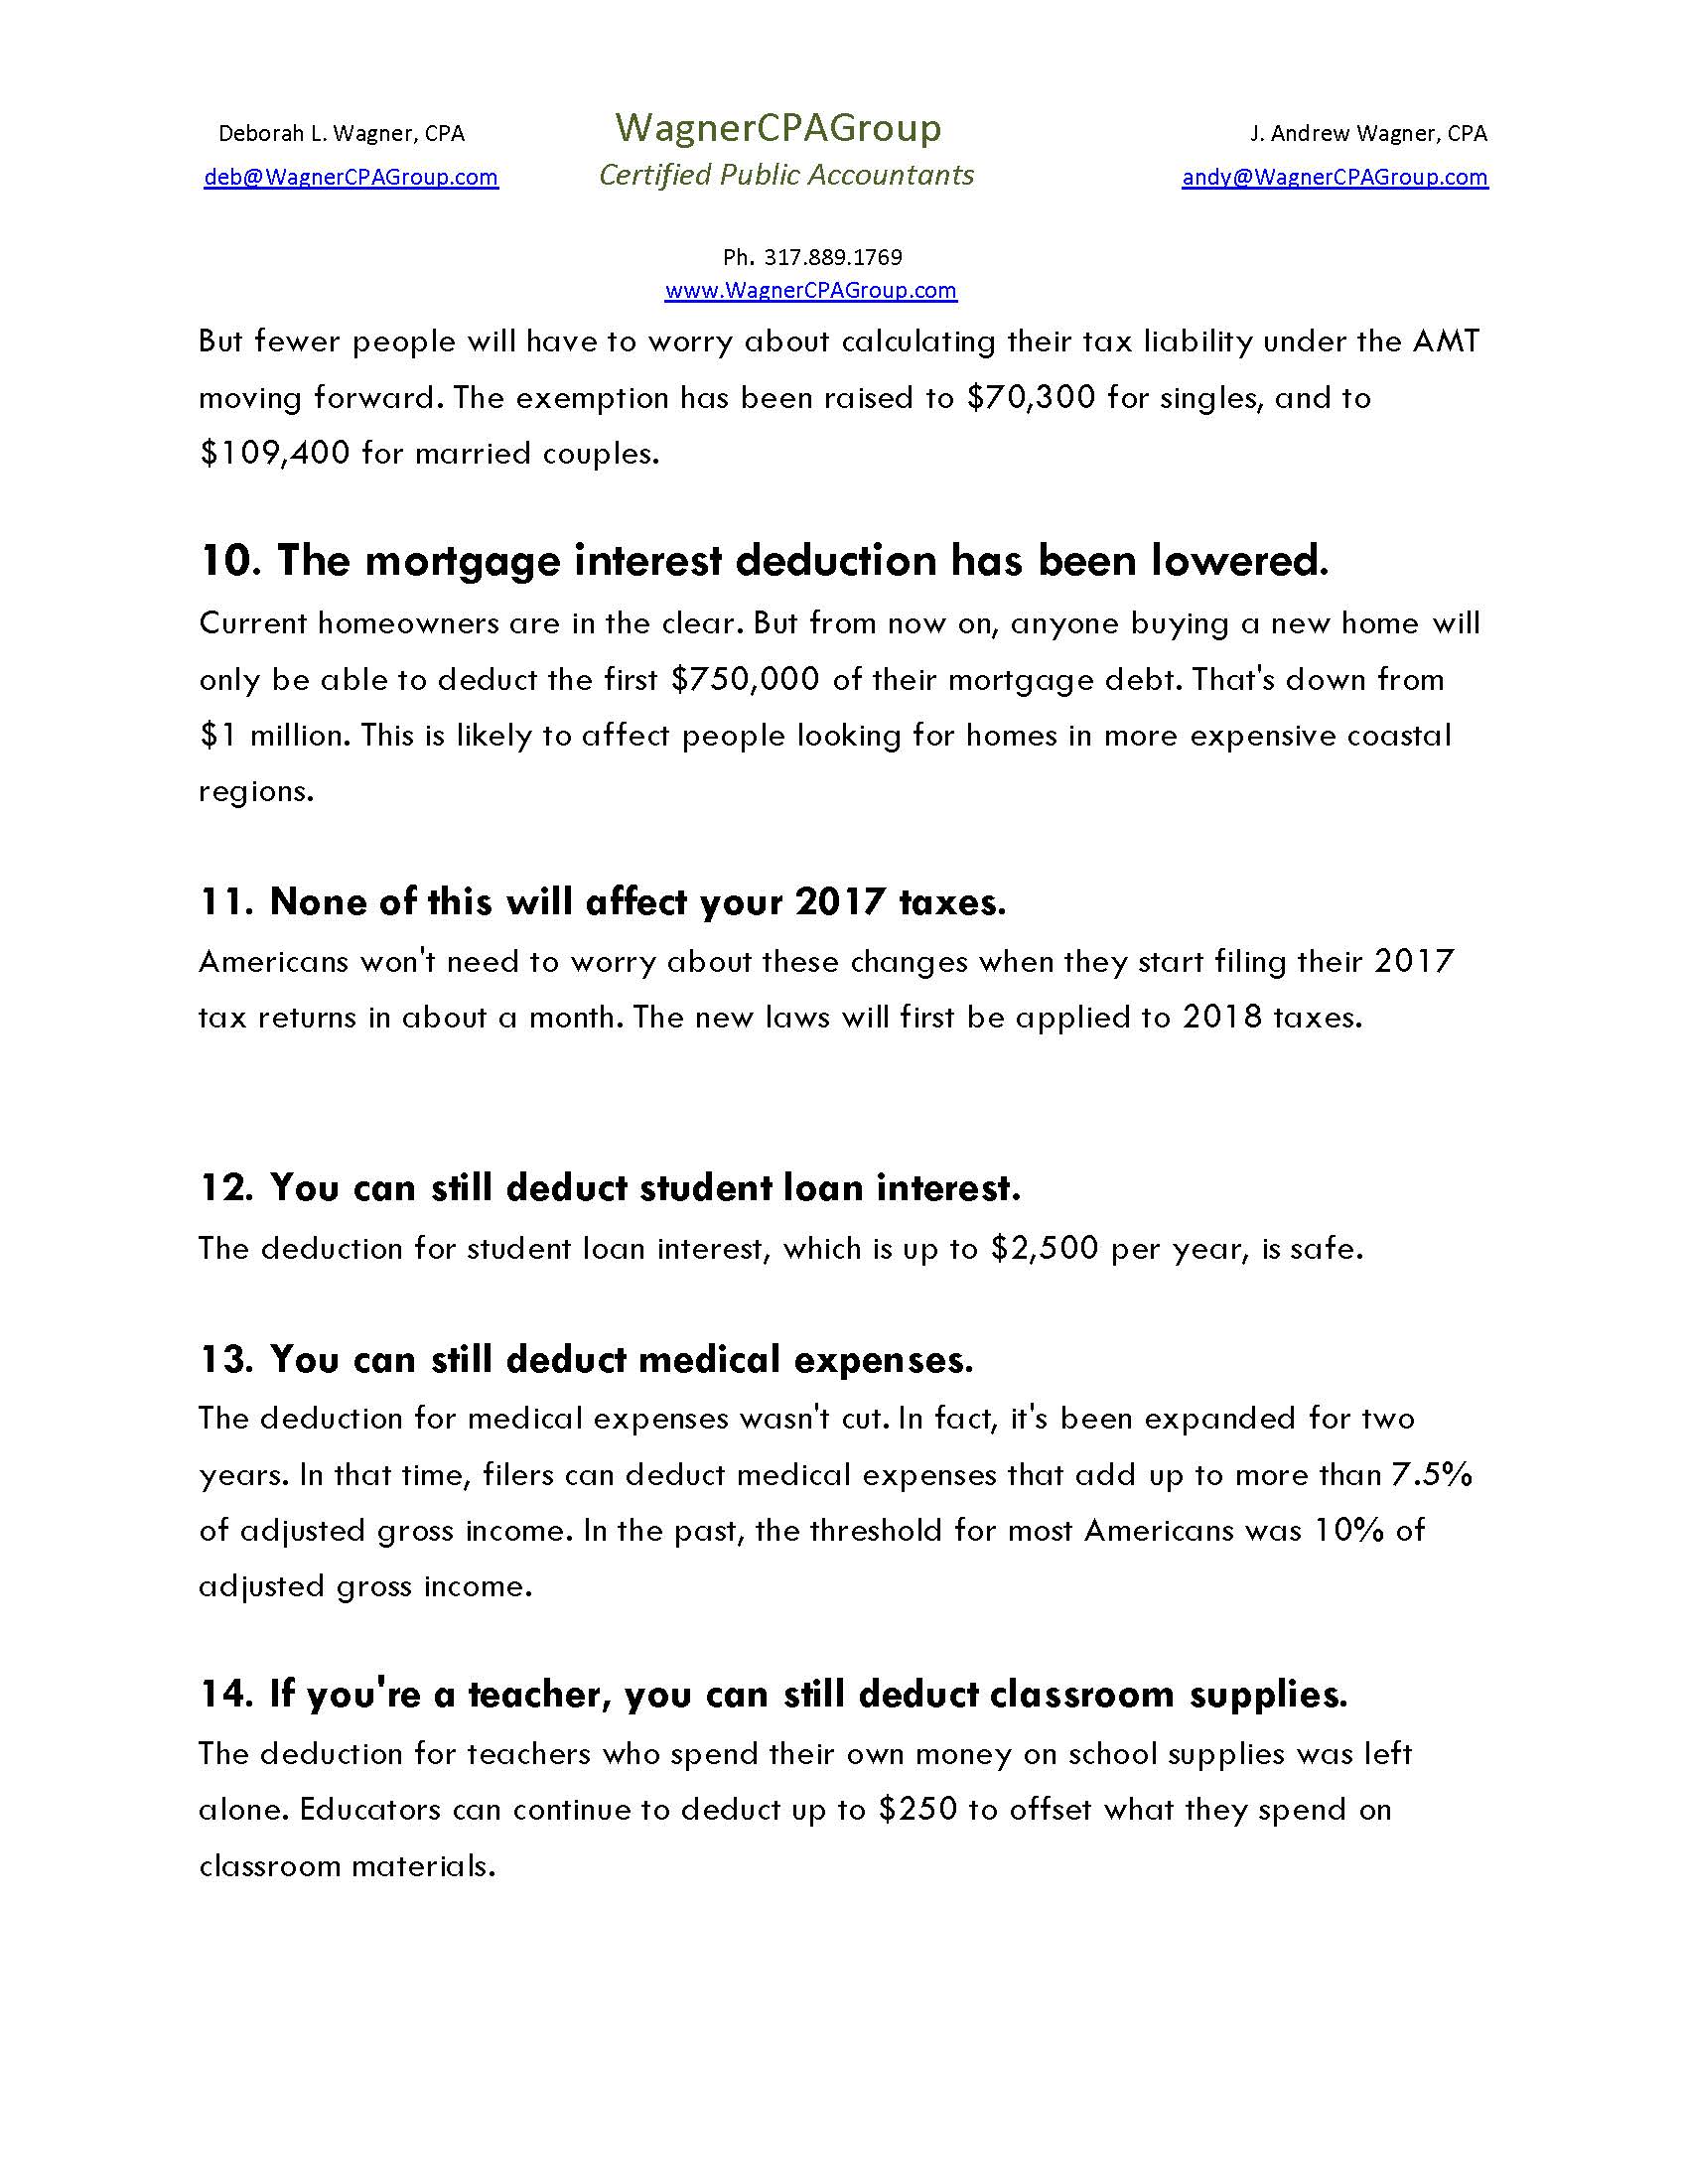 December 2017 Proposed Tax Reform Summary_Page_3.jpg